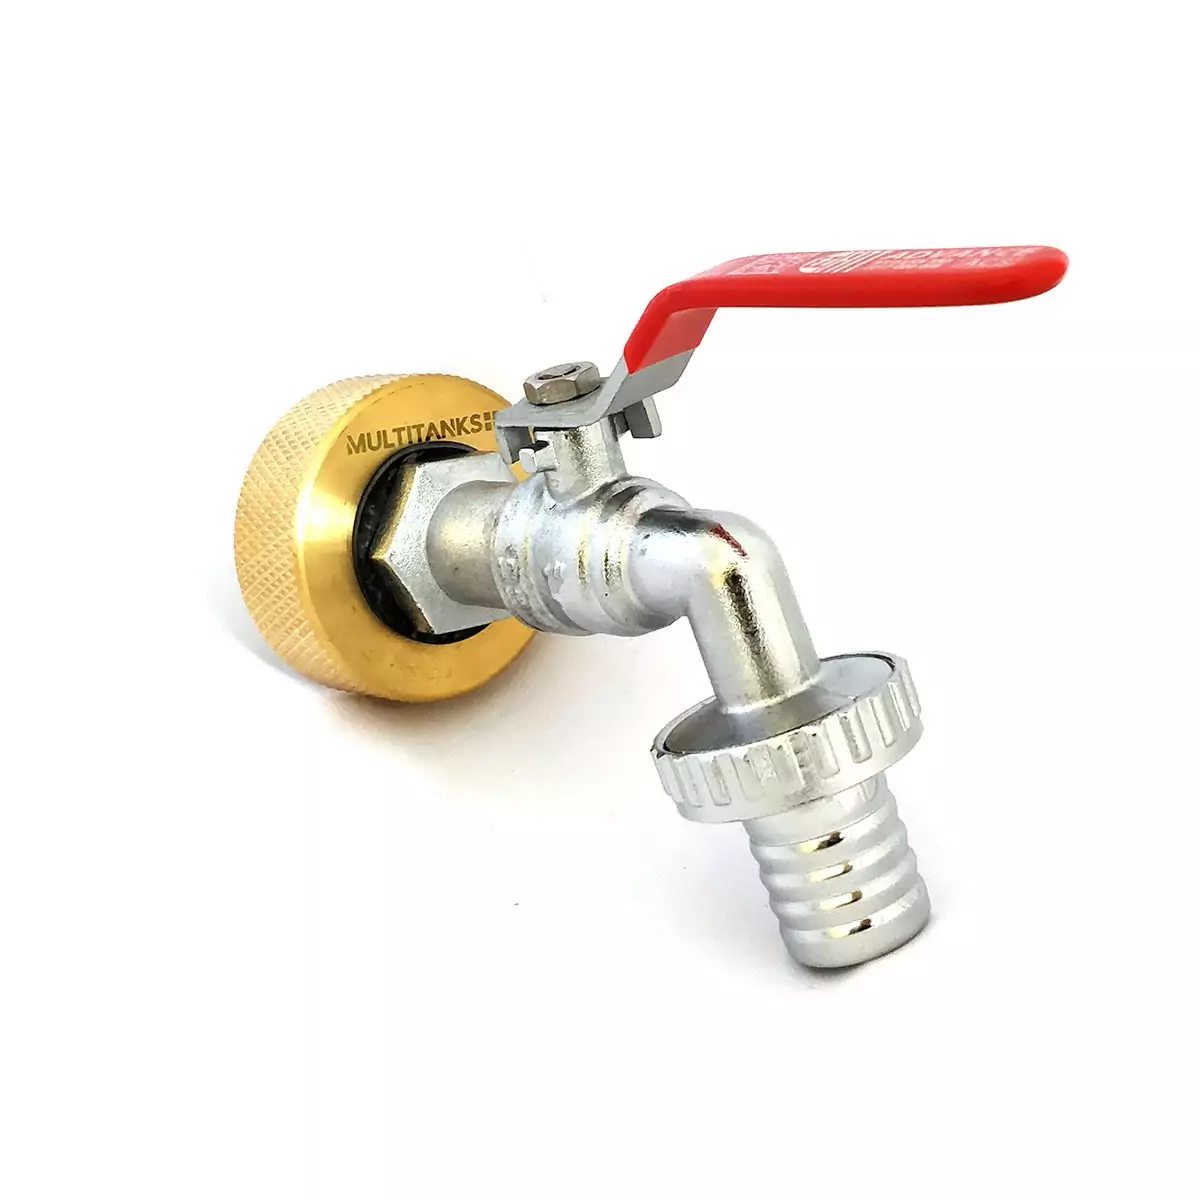 Female fitting S60x6 brass - brass valve outlet 1''1 / 4 fluted 25mm